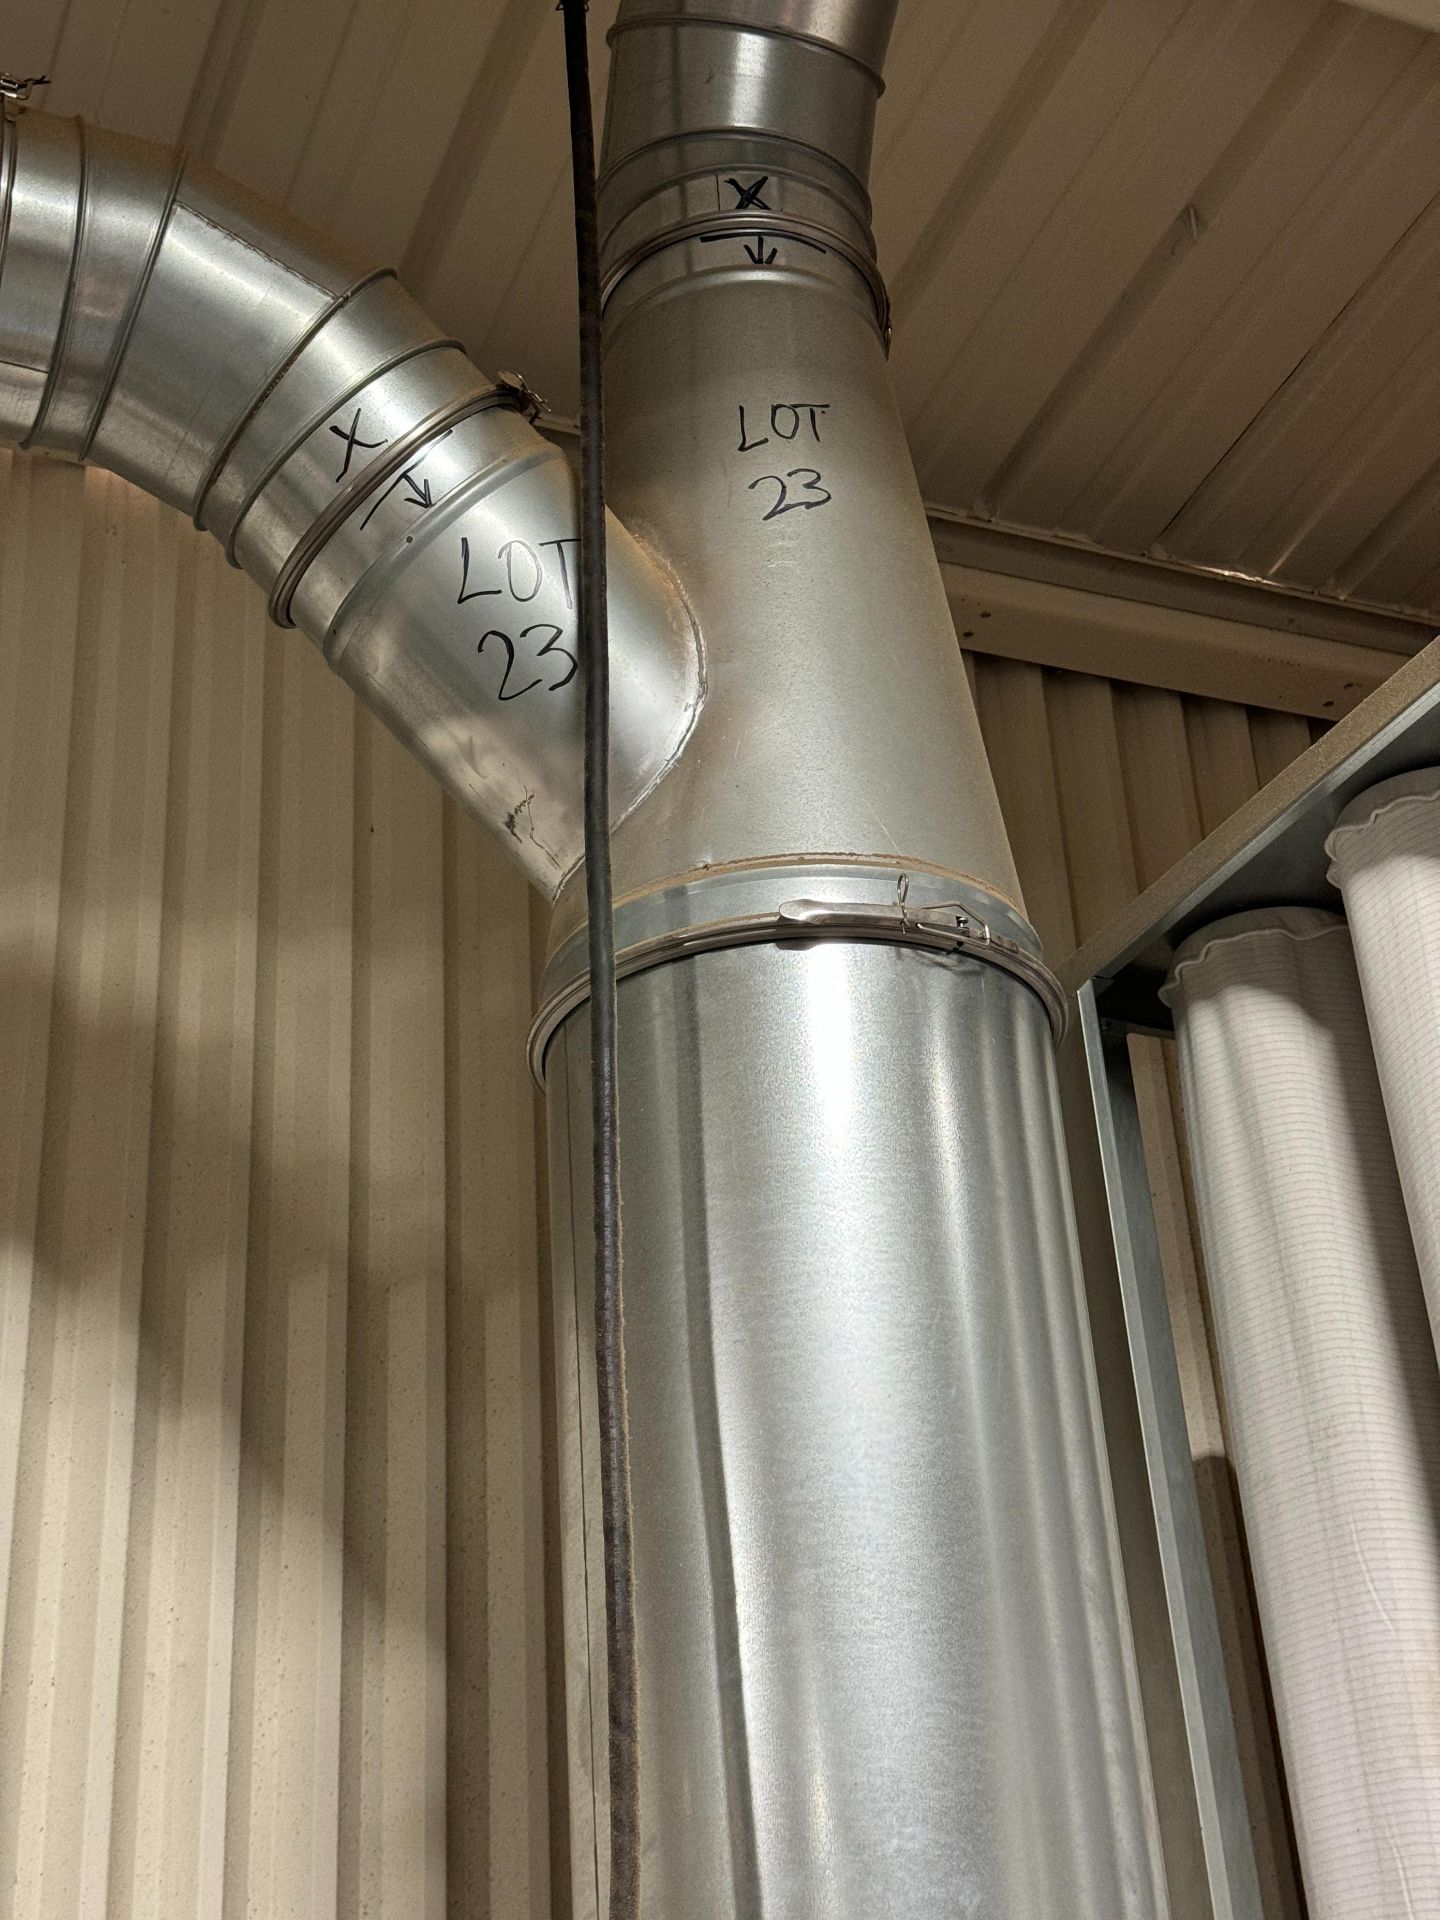 2018 NEDERMAN NFP-S1000 BAG FILTER DUST COLLECTOR, CTR. NO. 18345-00, ITEM NO. 89101009, 10 HP, 3- - Image 4 of 7